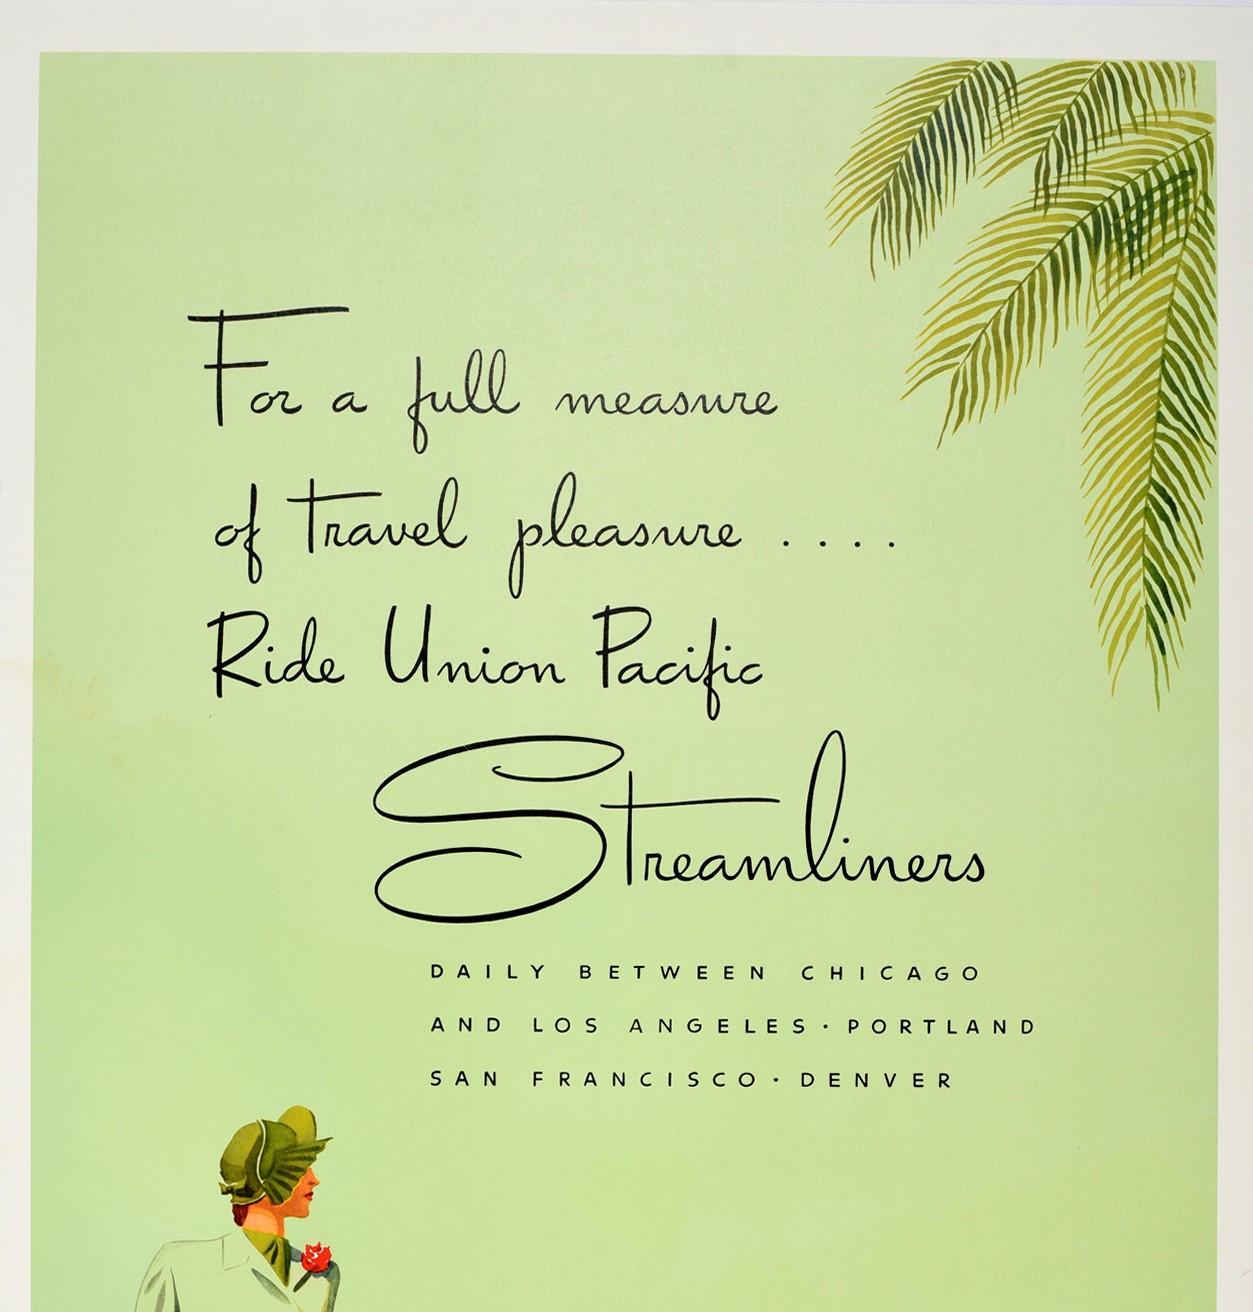 Original vintage travel advertising poster for Union Pacific Streamliners featuring a great design against a pale green background depicting smartly dressed people walking towards the viewer from a large Art Deco style yellow train locomotive with a